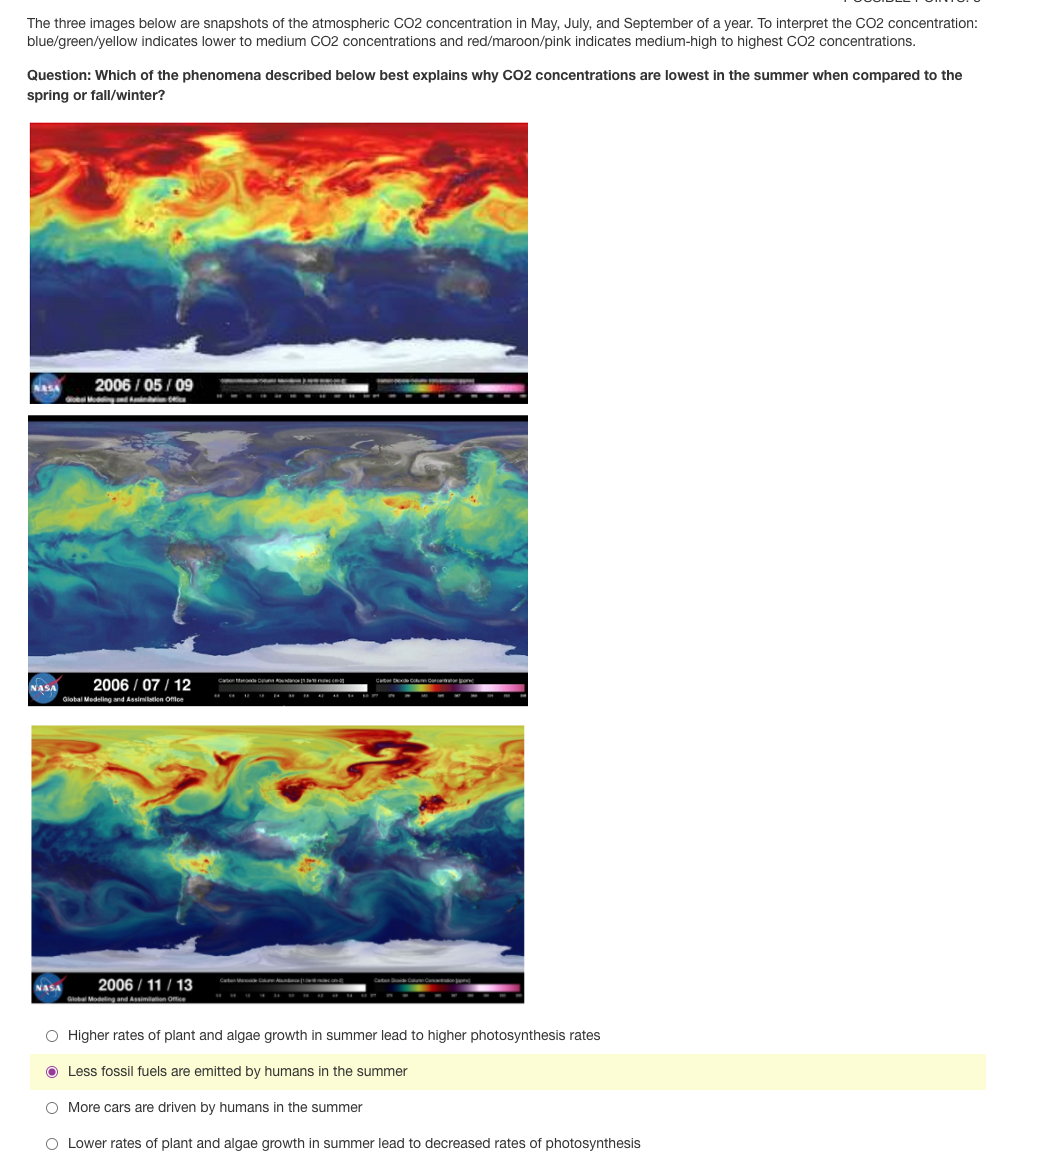 The three images below are snapshots of the atmospheric CO2 concentration in May, July, and September of a year. To interpret the CO2 concentration:
blue/green/yellow indicates lower to medium CO2 concentrations and red/maroon/pink indicates medium-high to highest CO2 concentrations.
Question: Which of the phenomena described below best explains why CO2 concentrations are lowest in the summer when compared to the
spring or fallI/winter?
2006 / 05 / 09
NASA
2006 / 07 / 12
Canon Den ano n n
Cat C m e
NASA
Global Medeling and Assinilten Offoe
Cate ae
2006 / 11 / 13
Gobal Modeling and Assimiation Ofice
NASA
O Higher rates of plant and algae growth in summer lead to higher photosynthesis rates
O Less fossil fuels are emitted by humans in the summer
O More cars are driven by humans in the summer
O Lower rates of plant and algae growth in summer lead to decreased rates of photosynthesis
